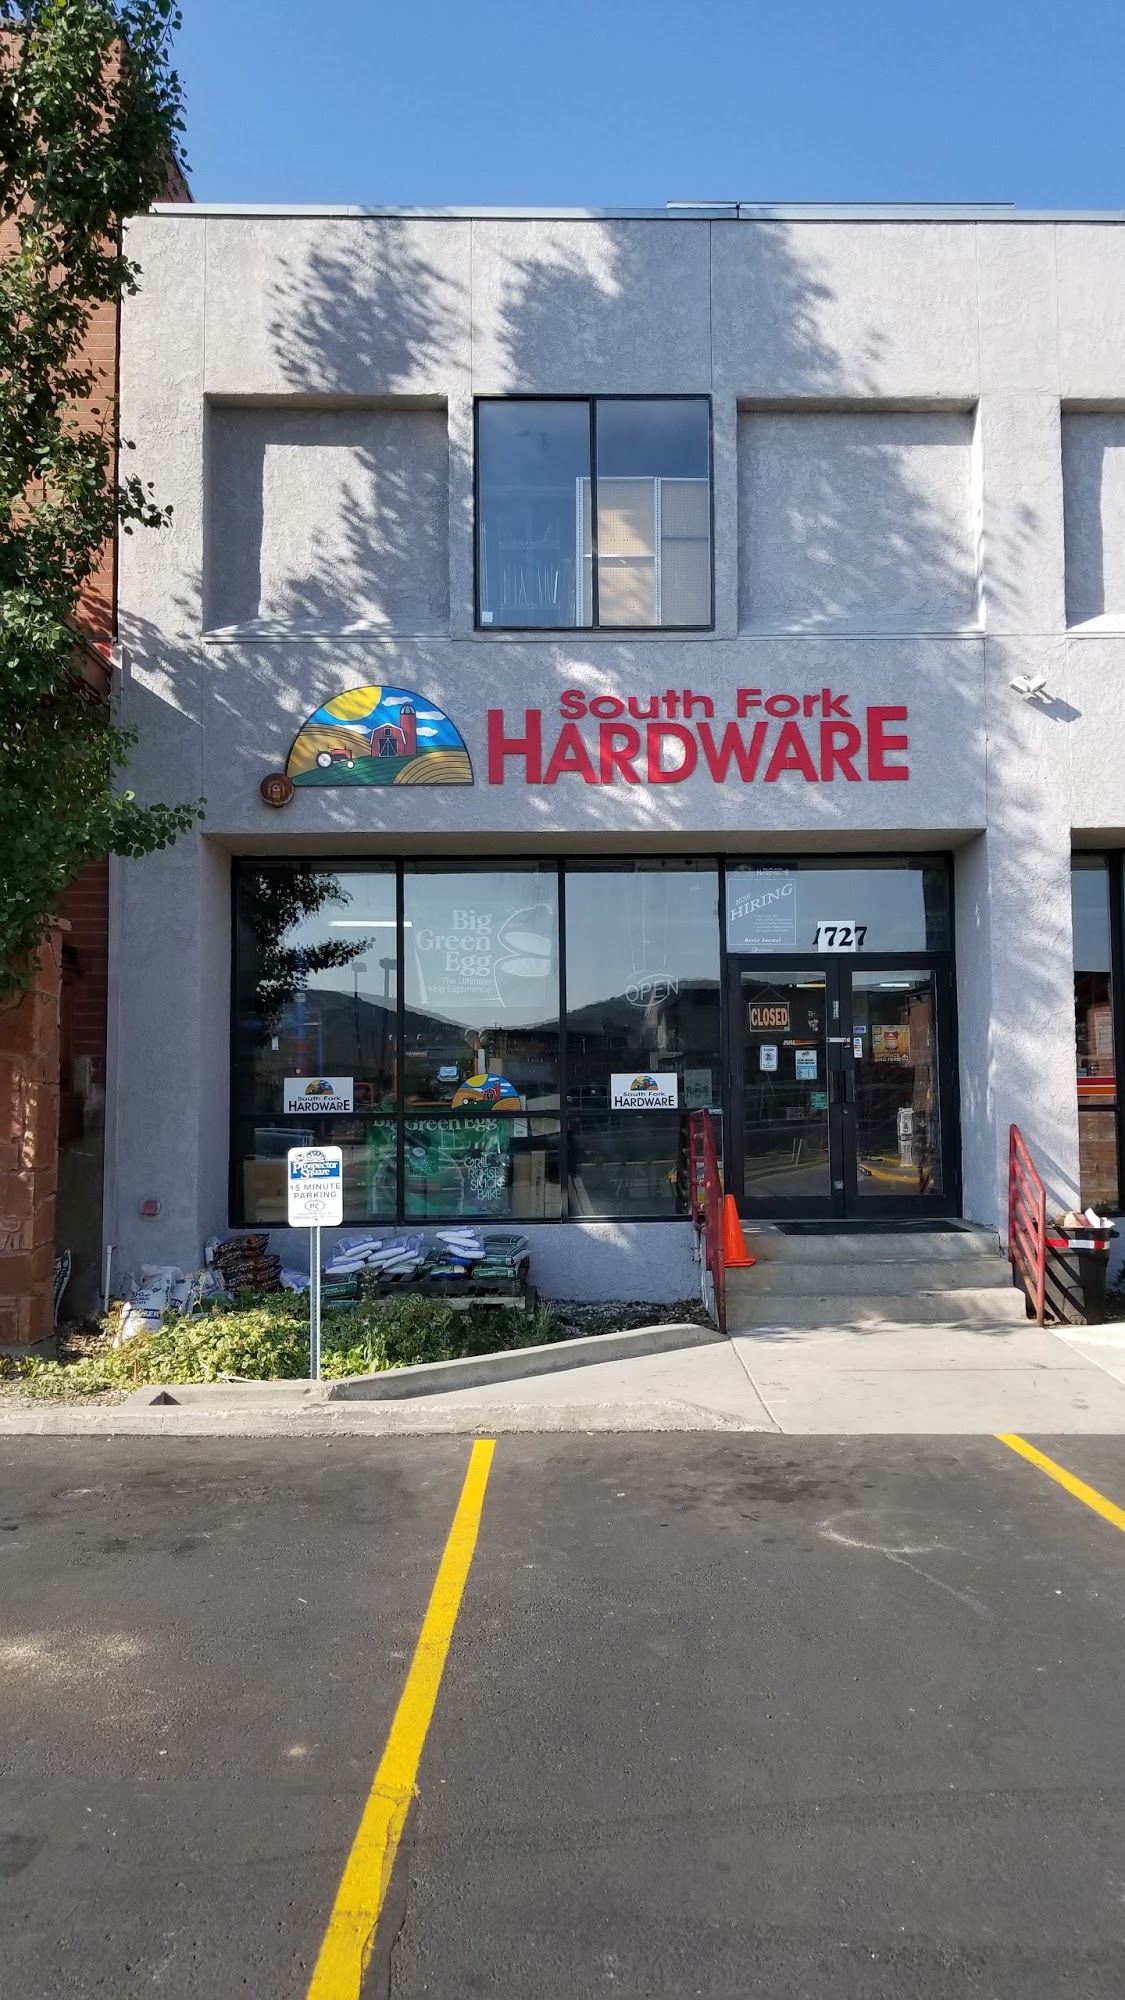 South Fork Hardware & Auto Parts